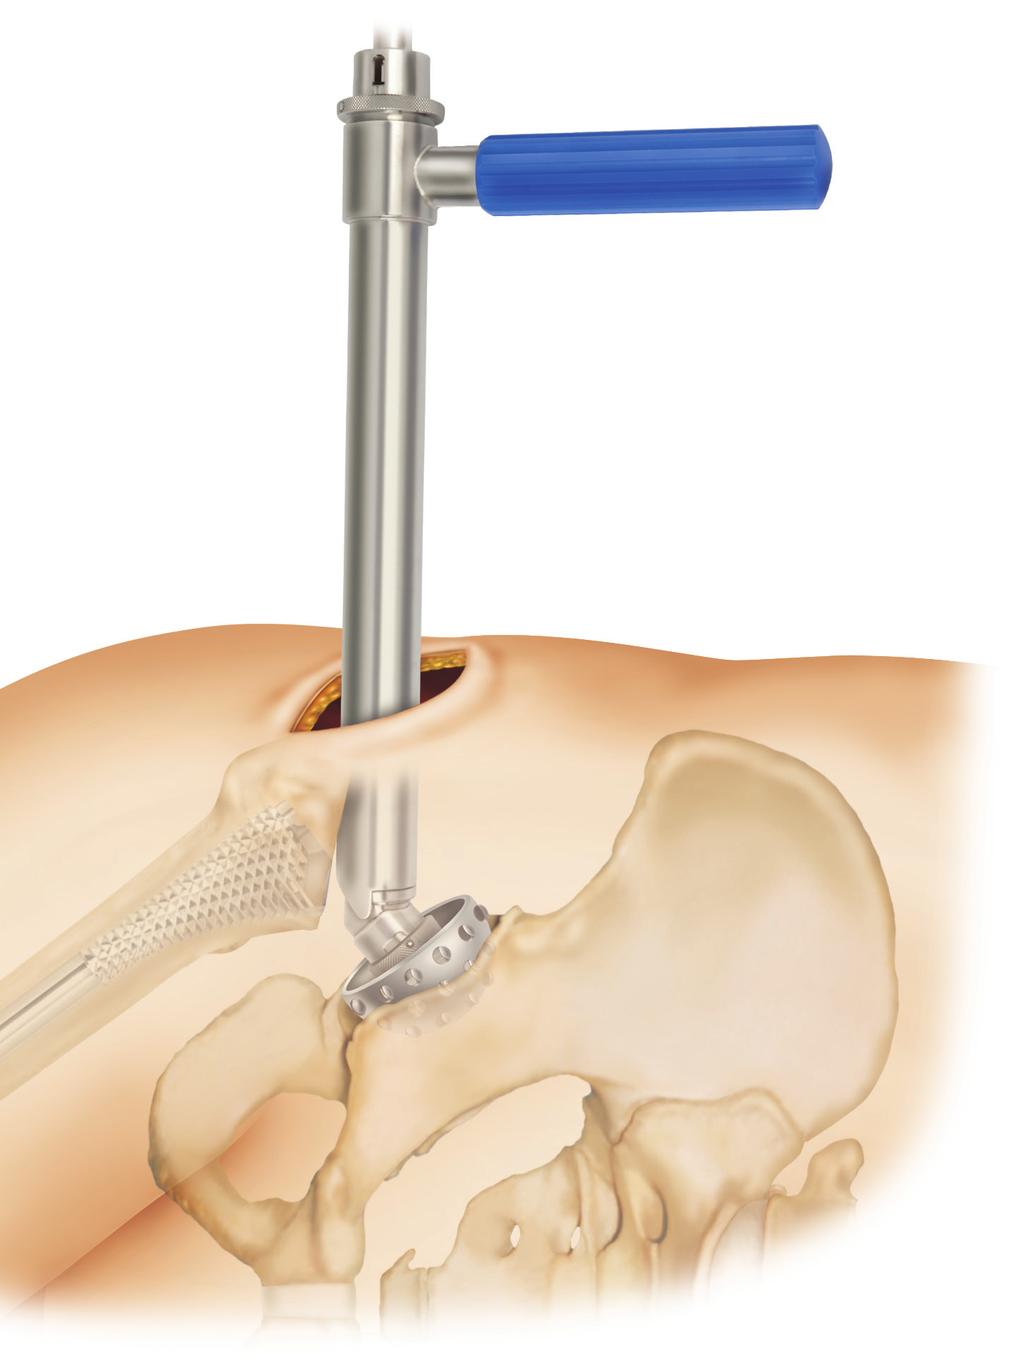 Trial Reduction Replace the smaller broach that was used for the neck osteotomy with the final broach. Place the trial head into the socket.